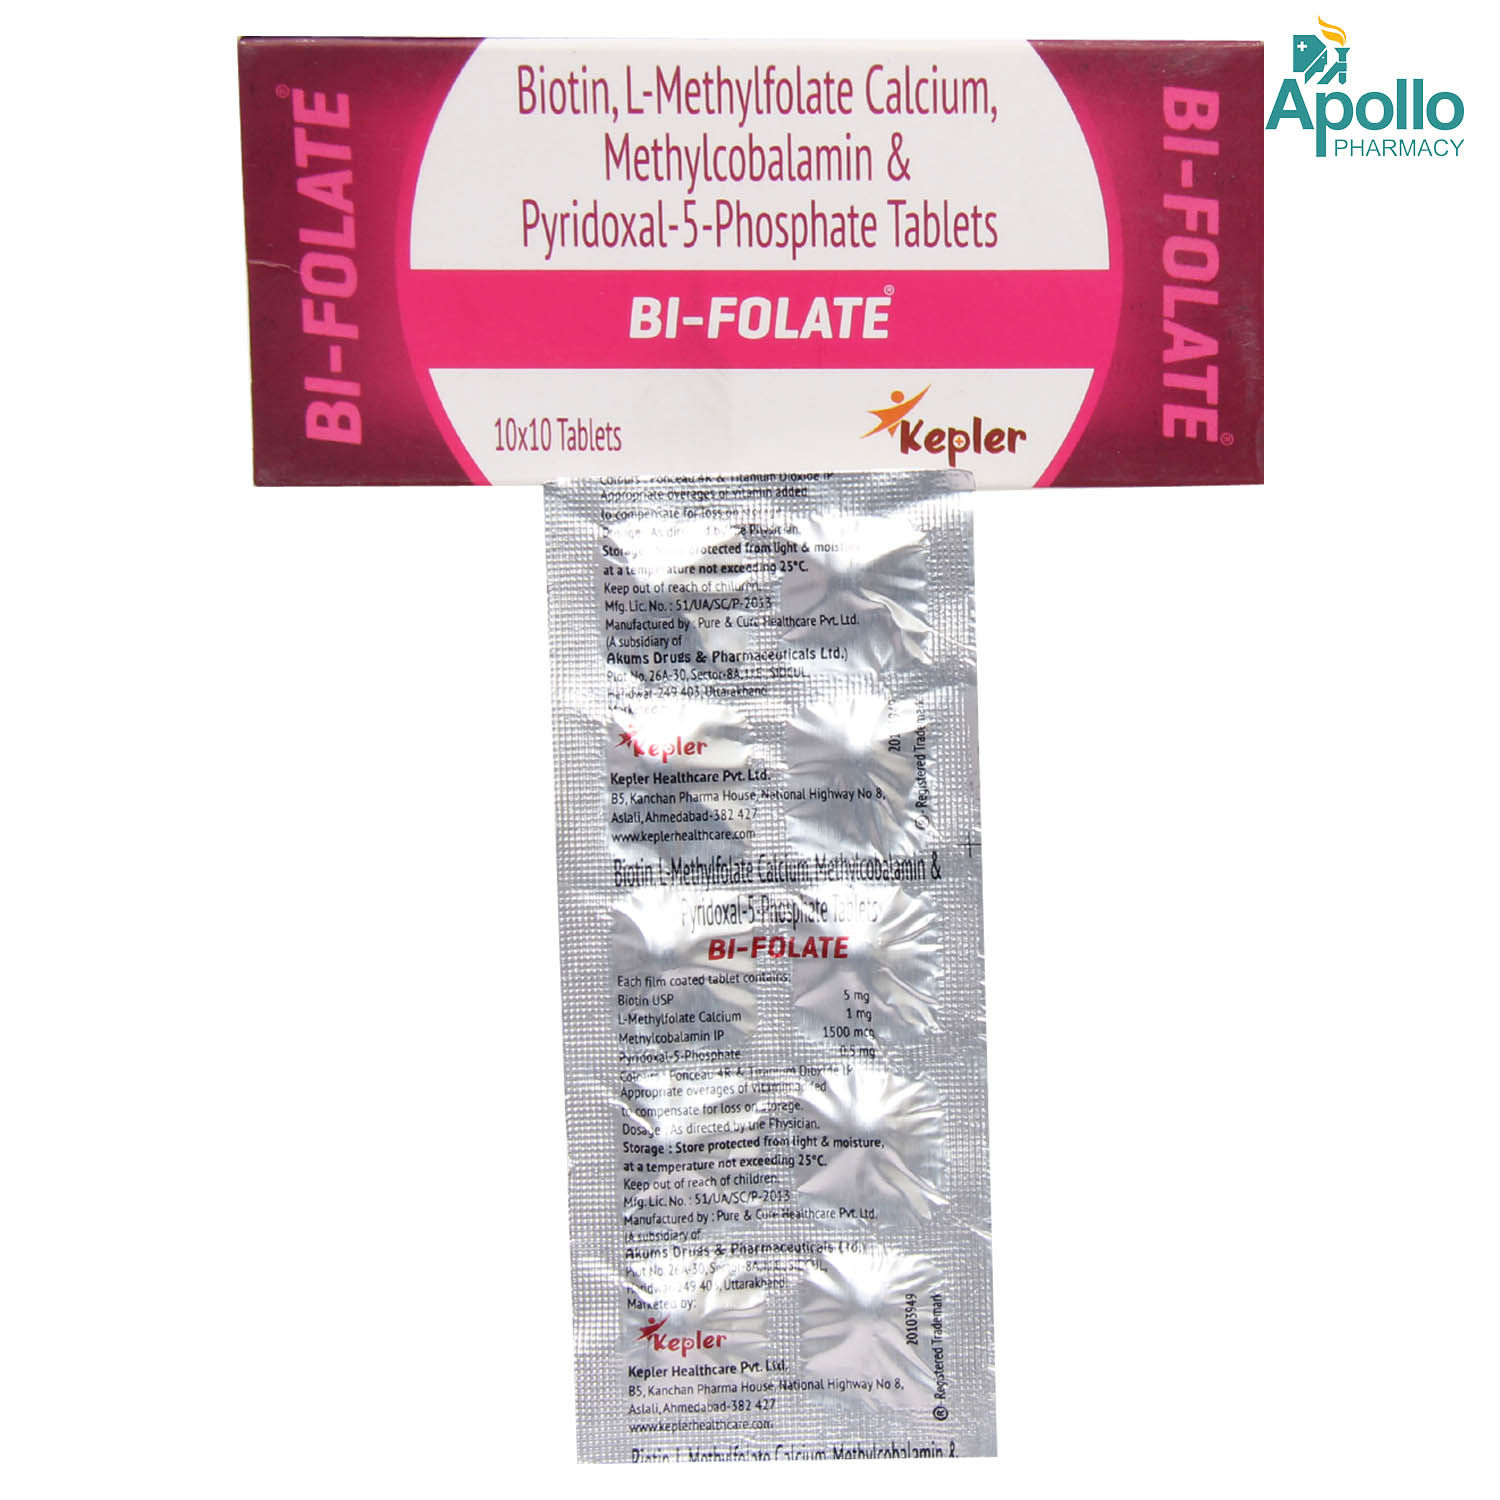 BI-Folate Tablet 10's Price, Uses, Side Effects, Composition - Apollo